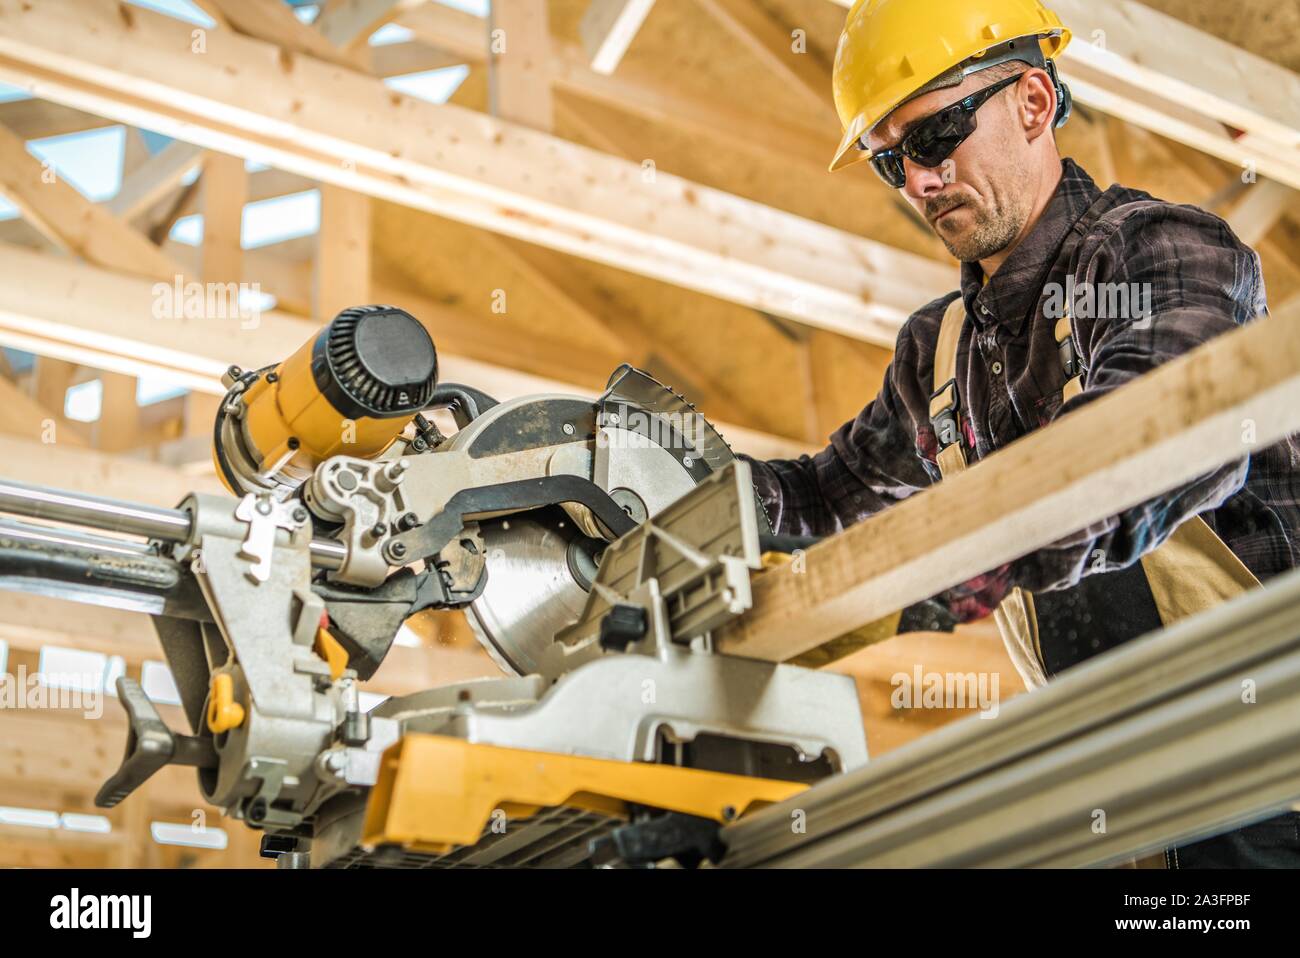 Powerful Wood Construction Electric Saw. Caucasian Carpenter in His 30s Cutting Wooden Elements. Industrial Theme. Stock Photo